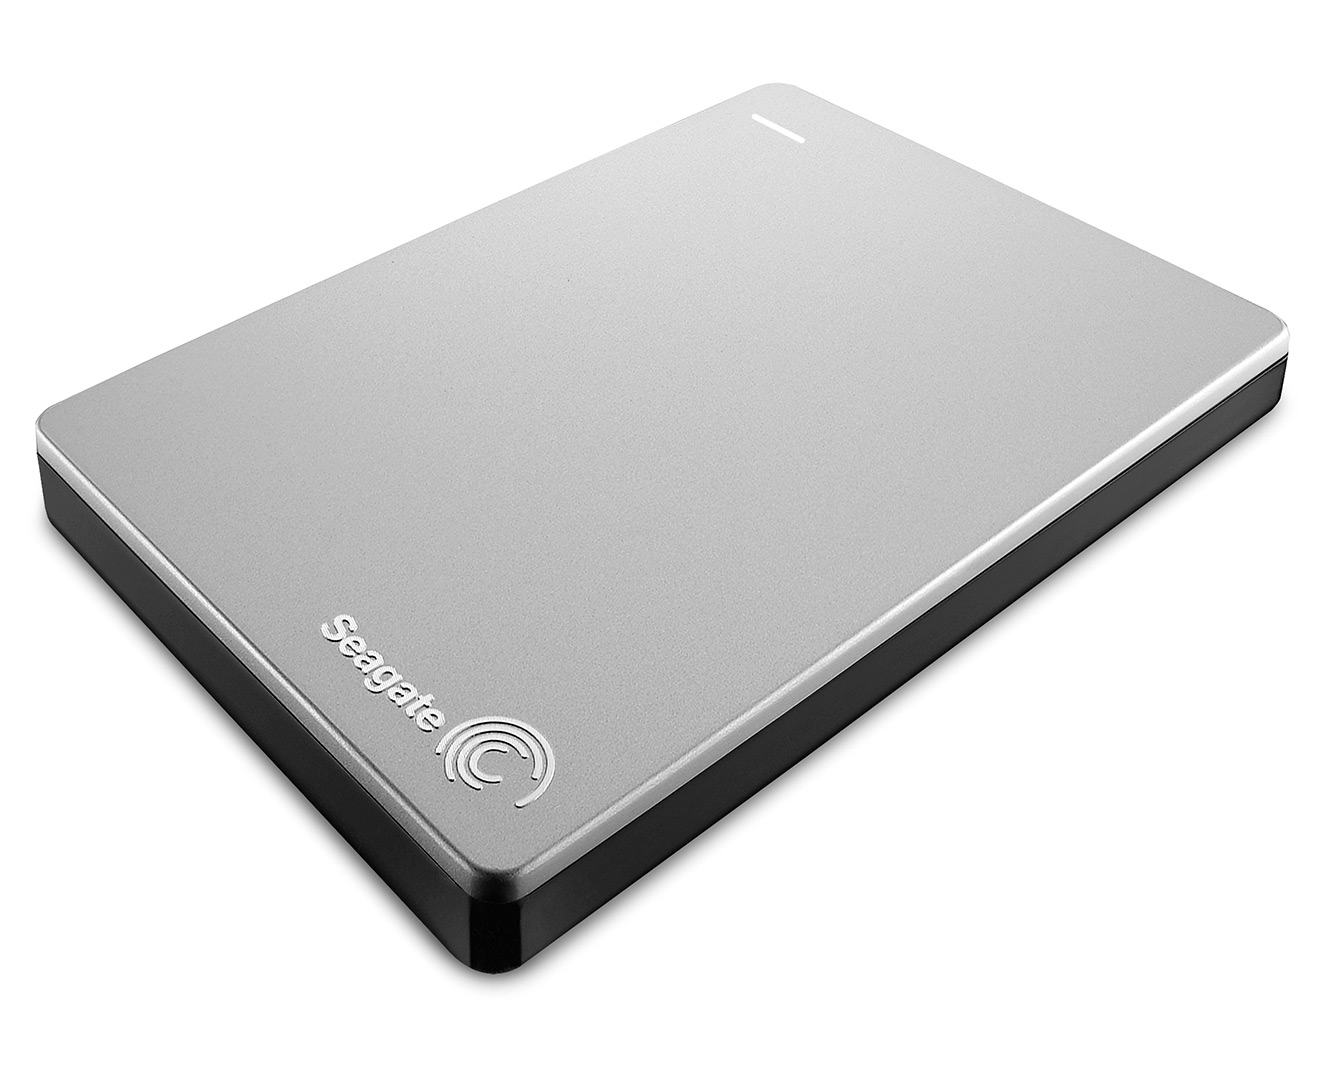 How to use seagate backup plus slim